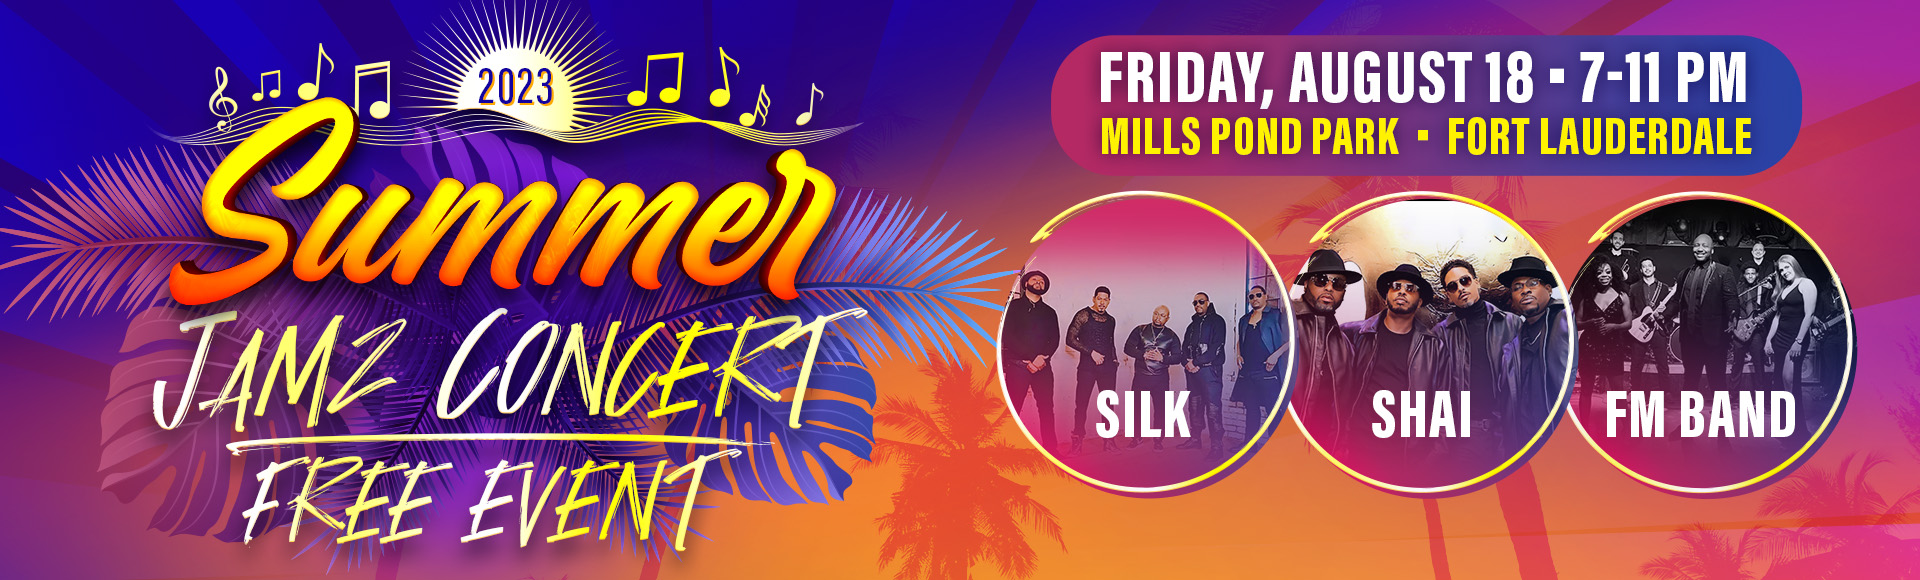 Summer Jamz Concert. Free event. Friday, August 18, 2023. 7 to 11 PM. Mills Pond Park, Fort Lauderdale. Photos of FM Band, Shai, and Silk.